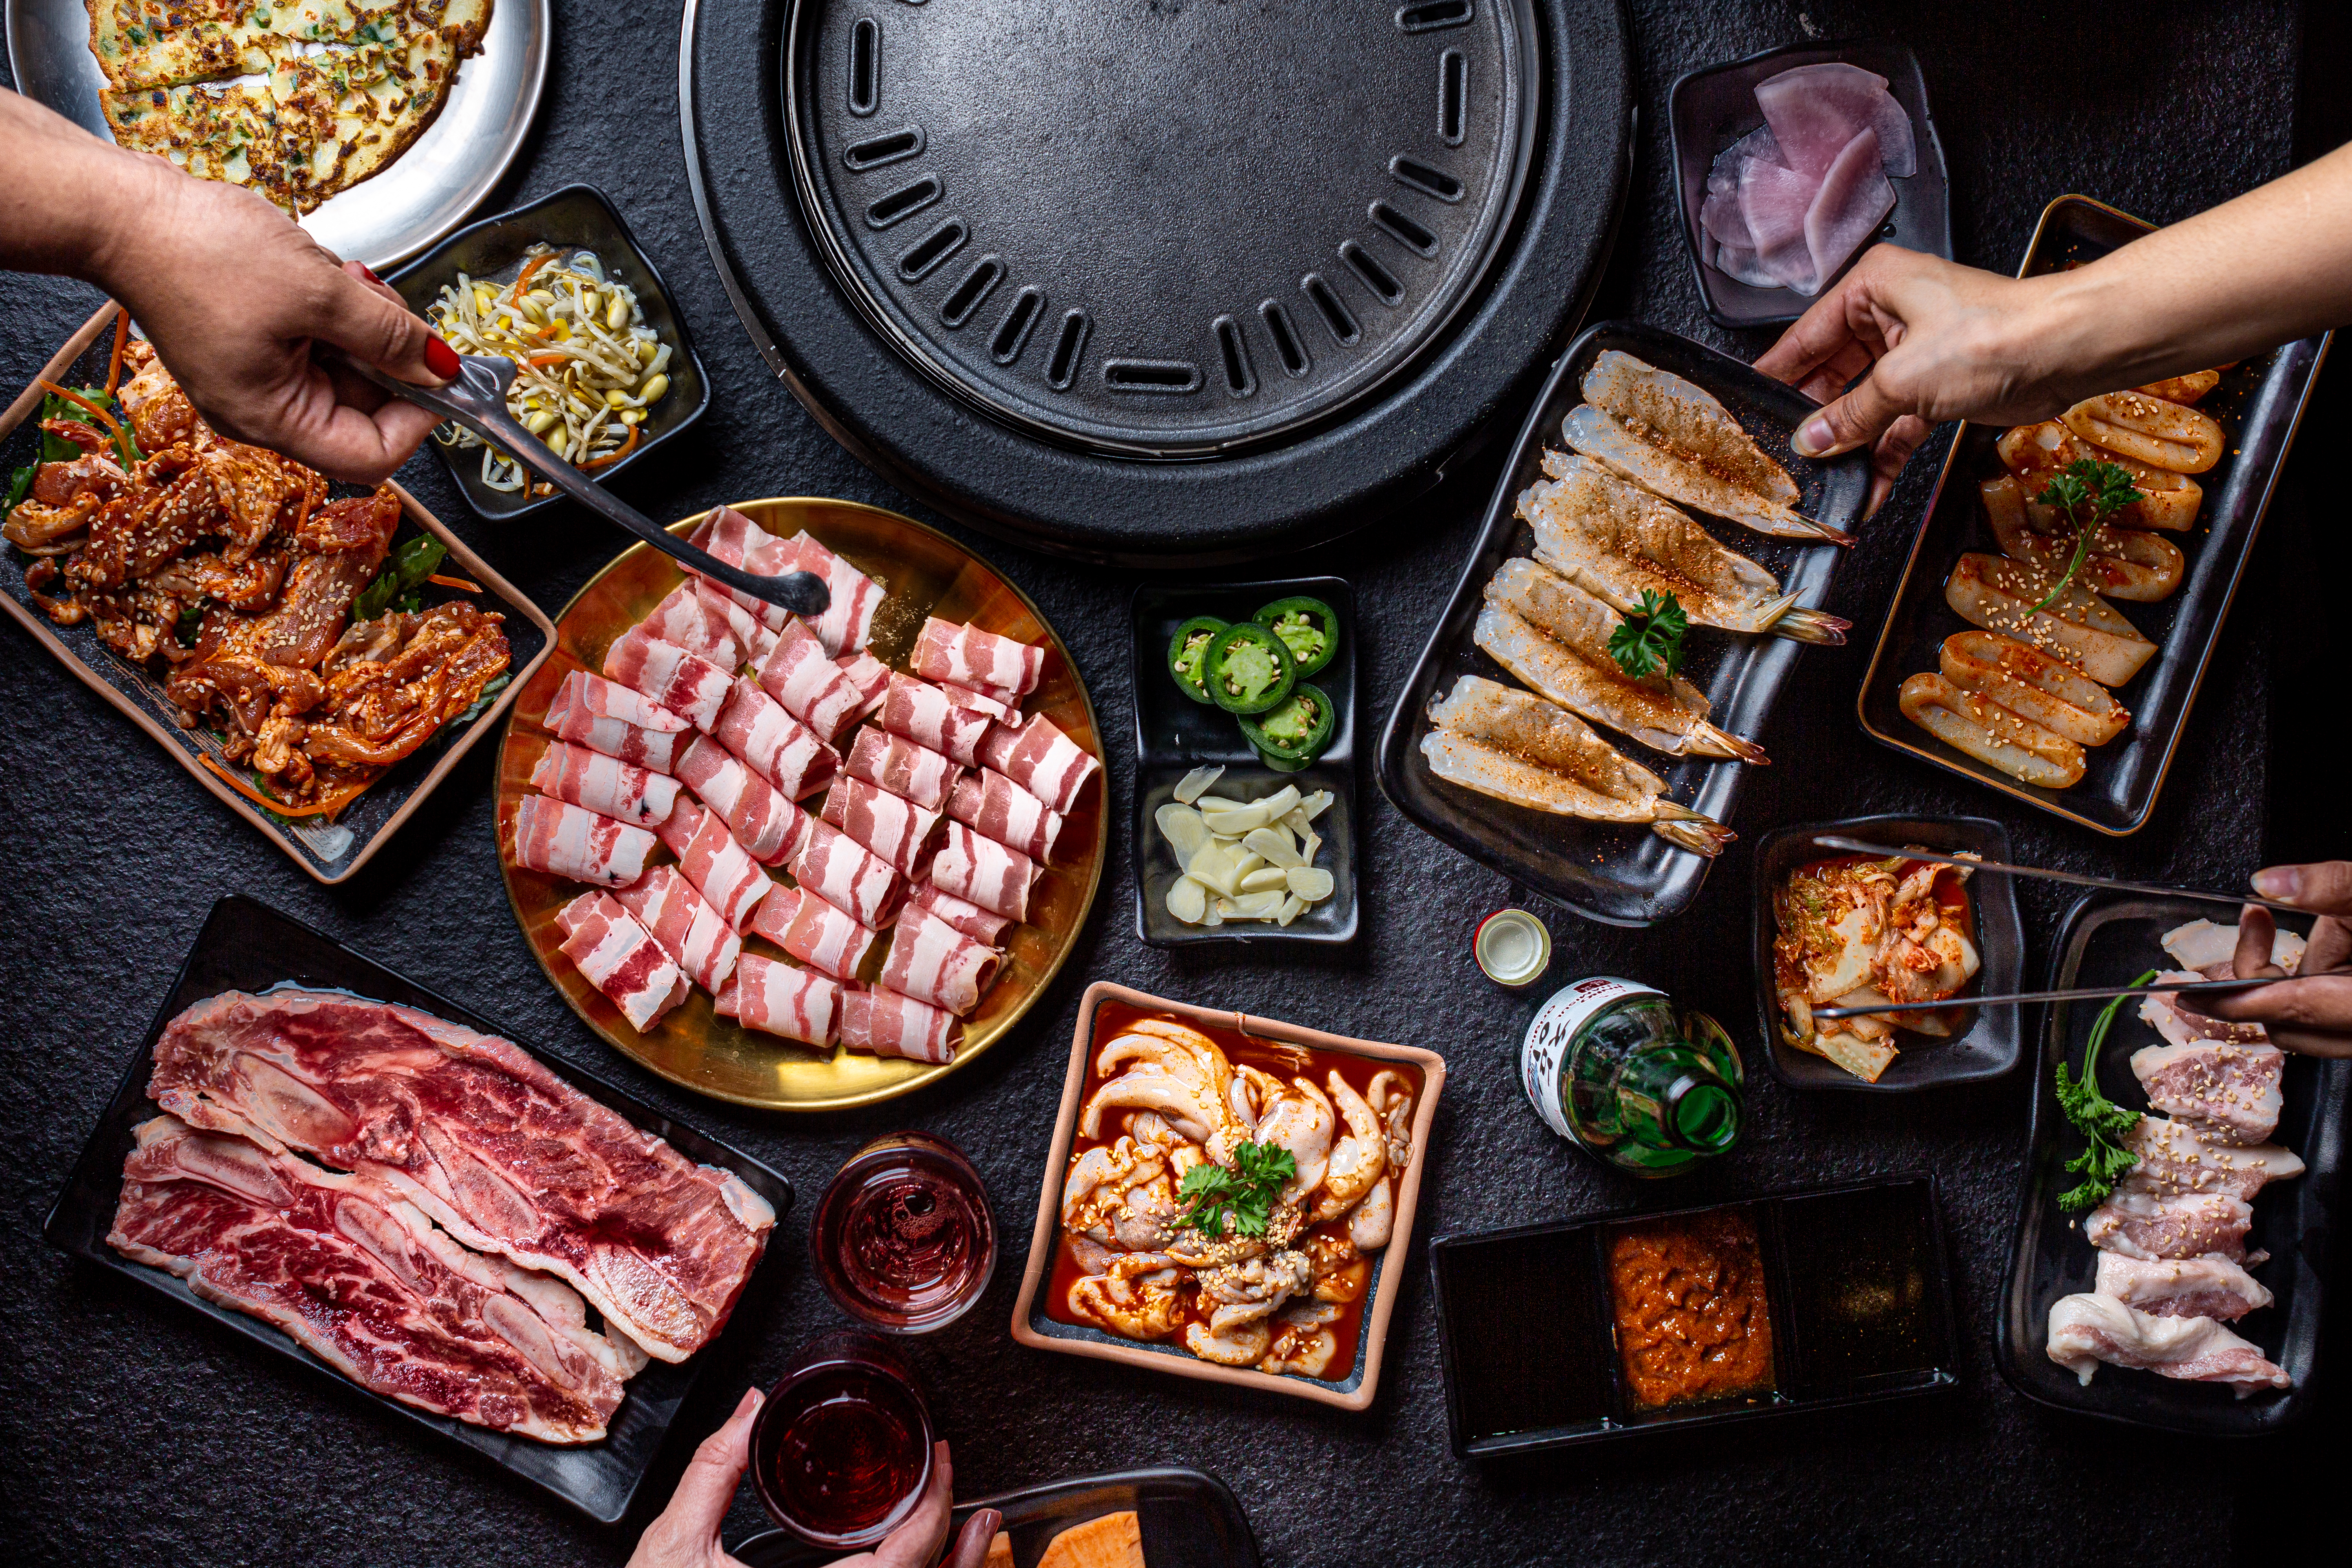 A large spread of grilled meats and banchan.